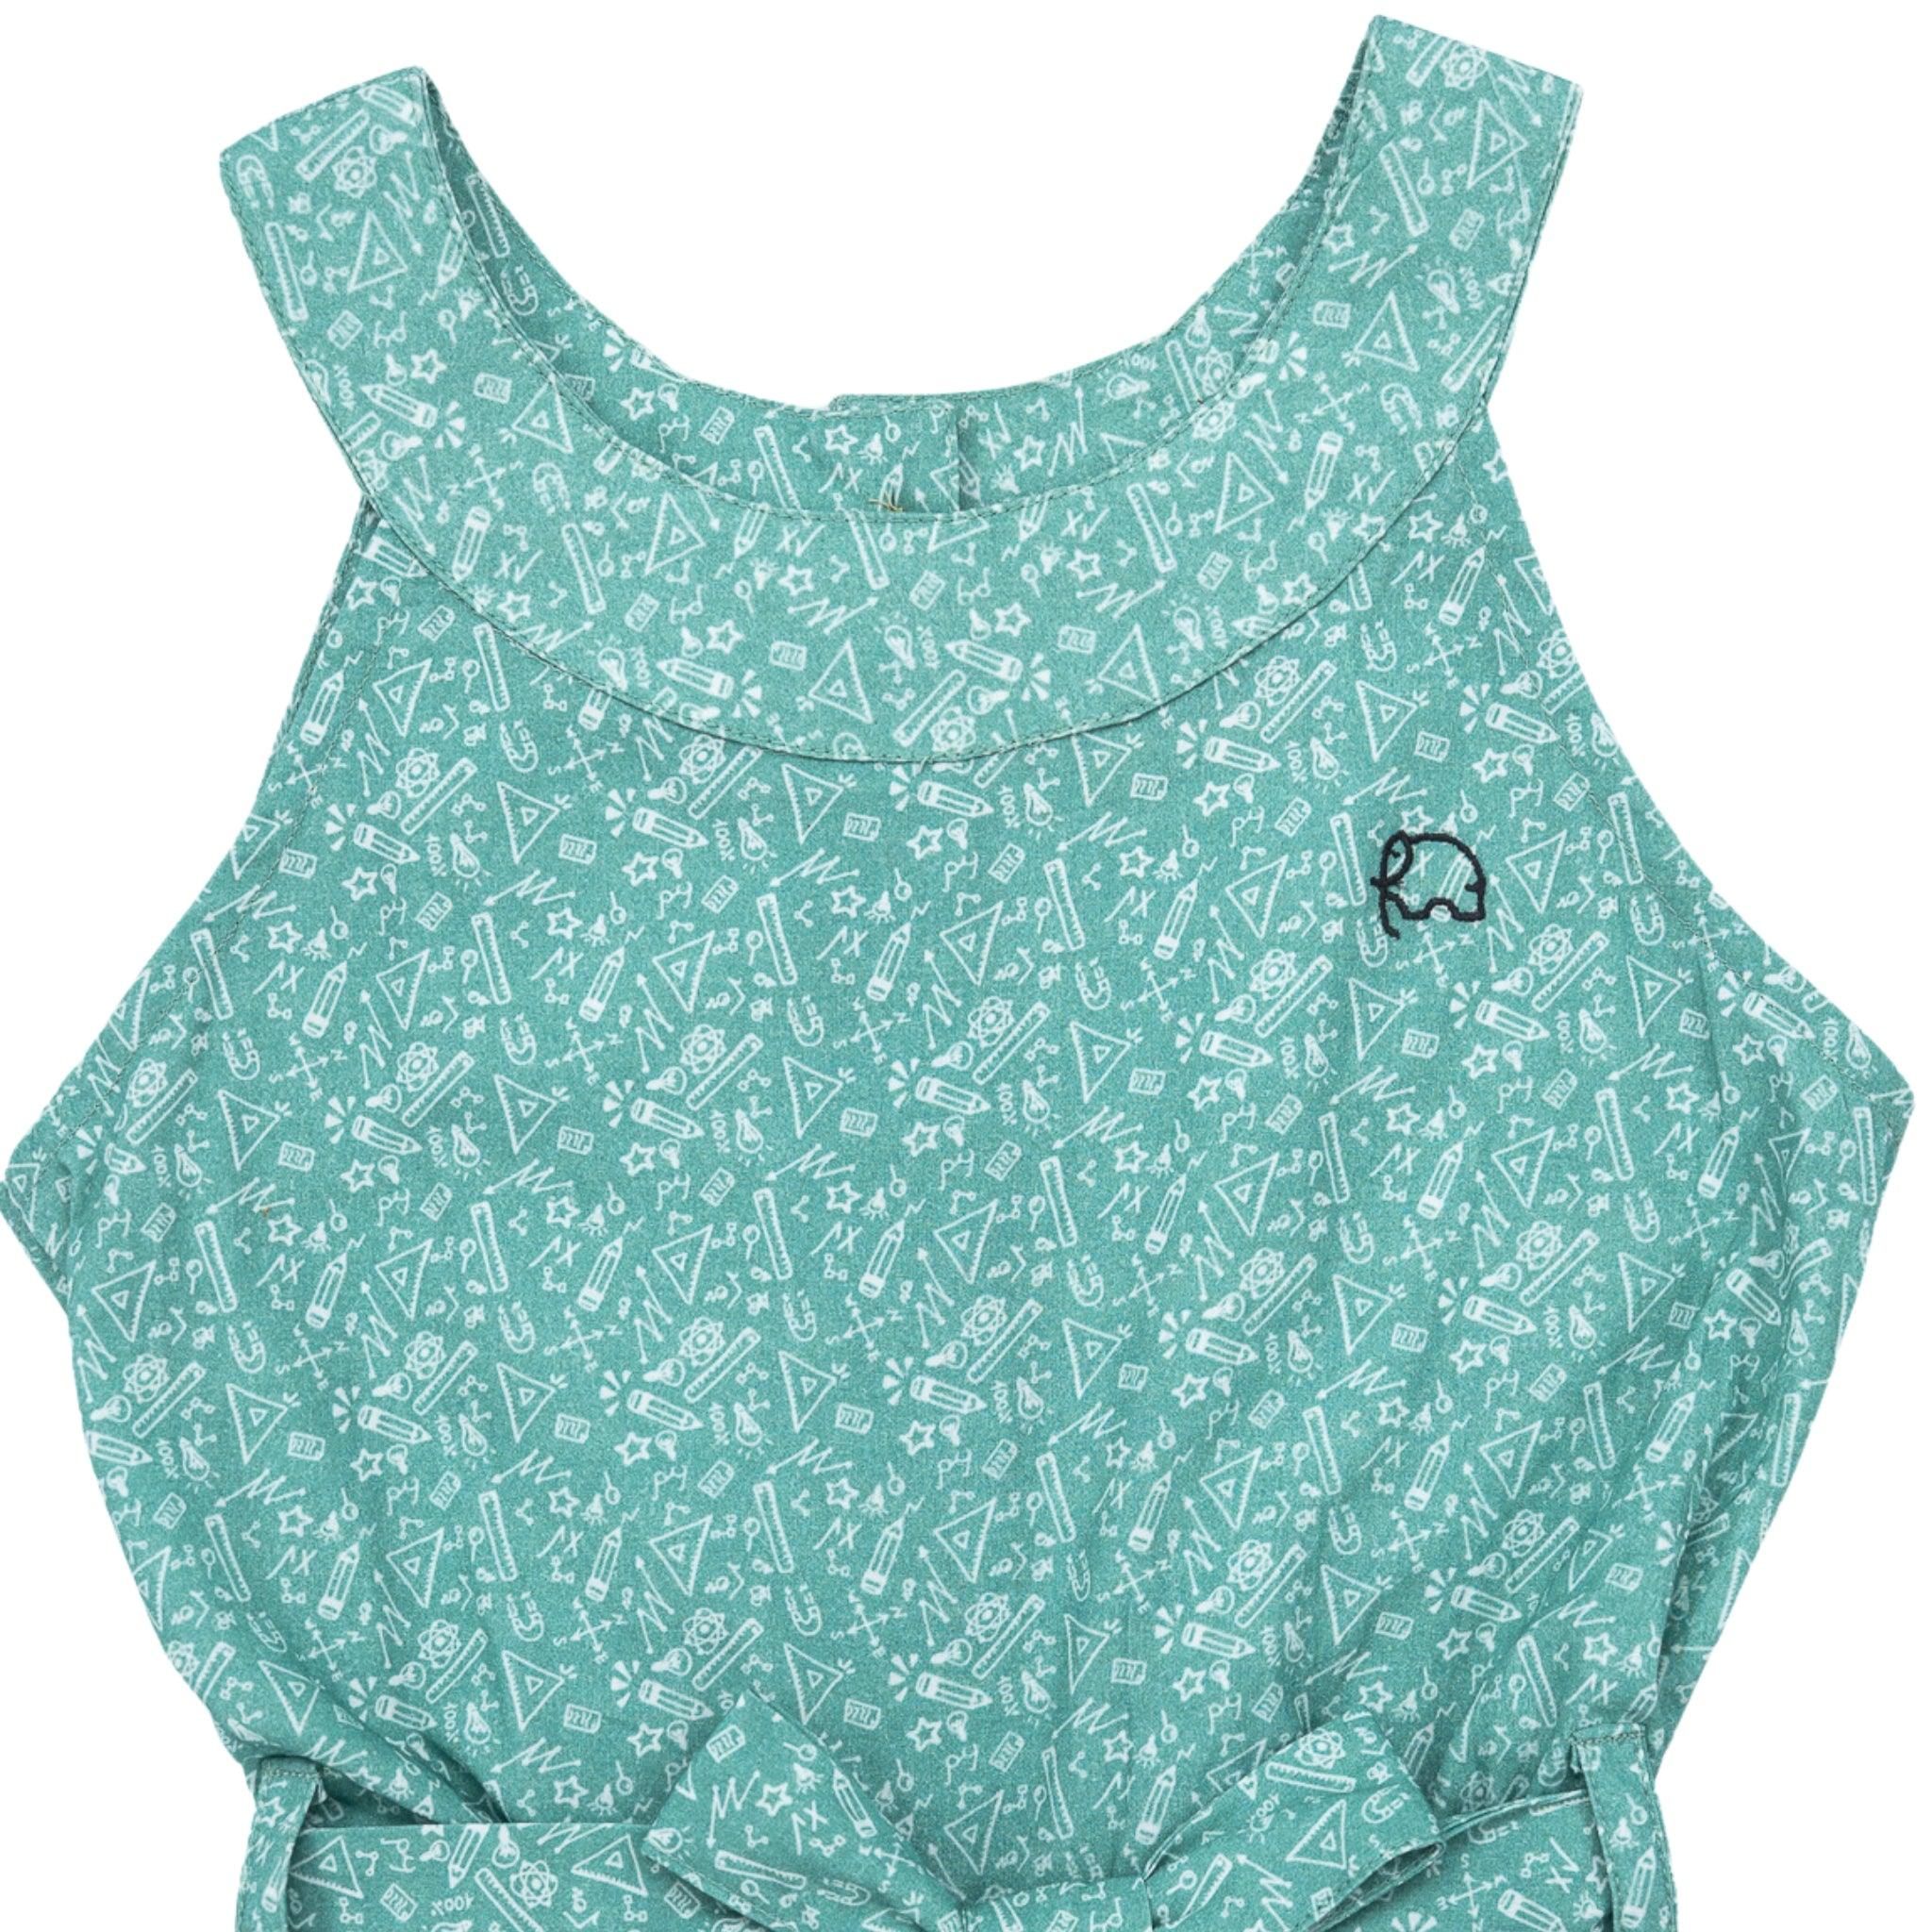 A Karee smoke green cotton jumpsuit for girls featuring a pattern of white triangles and a small black logo on the lower right side.